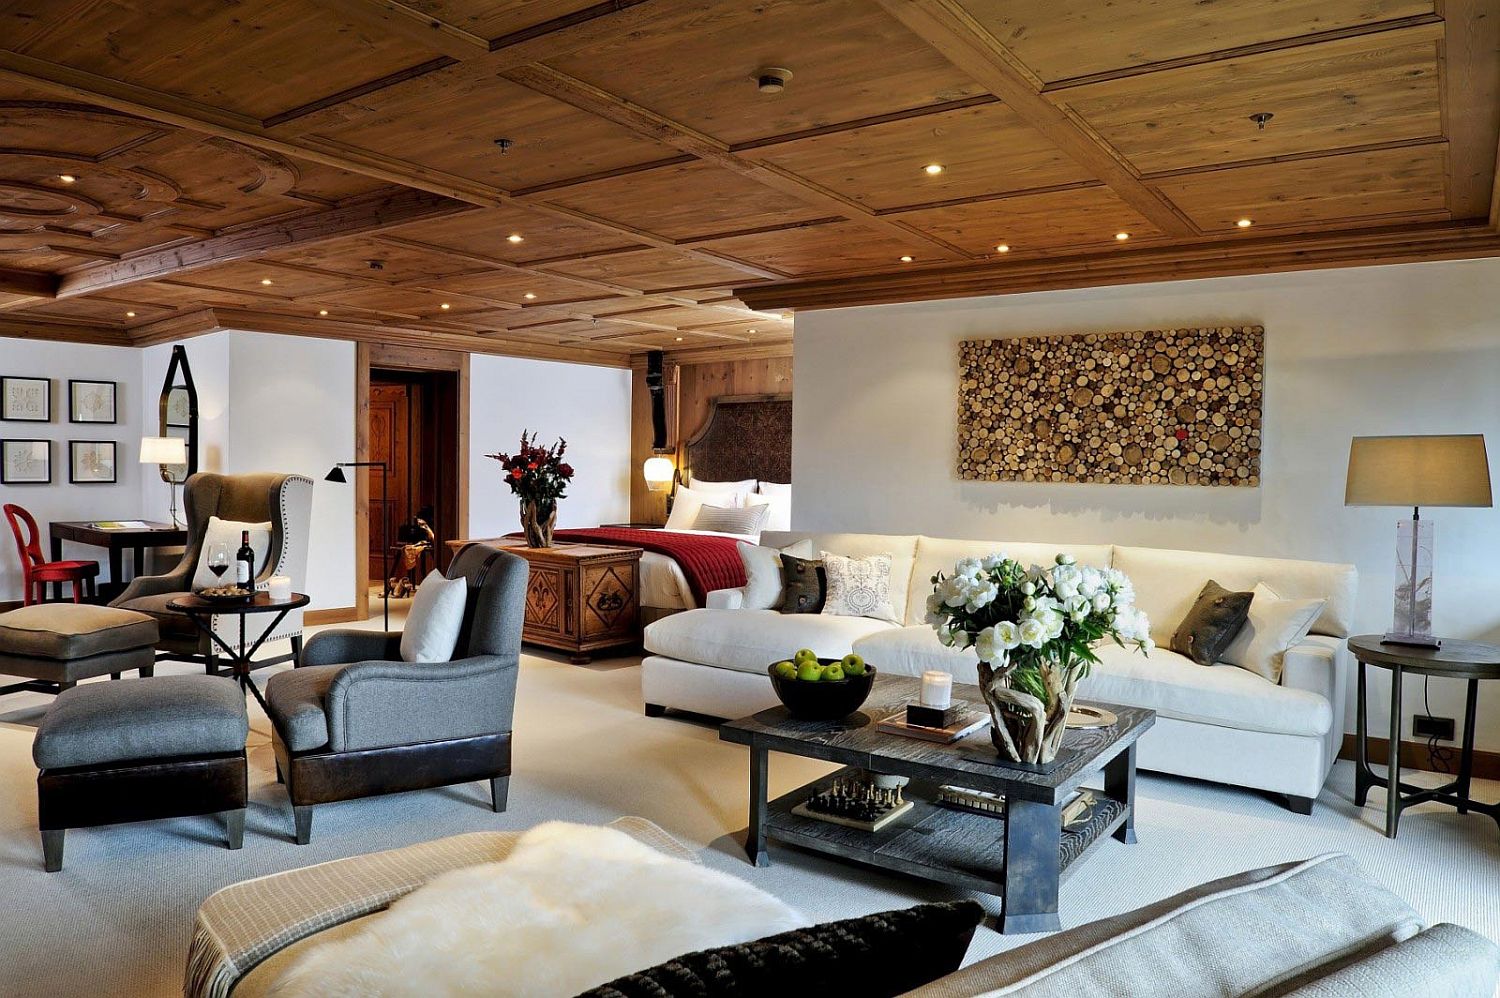 Classic Alpine design blended with 5-star comfort at Alpina Gstaad